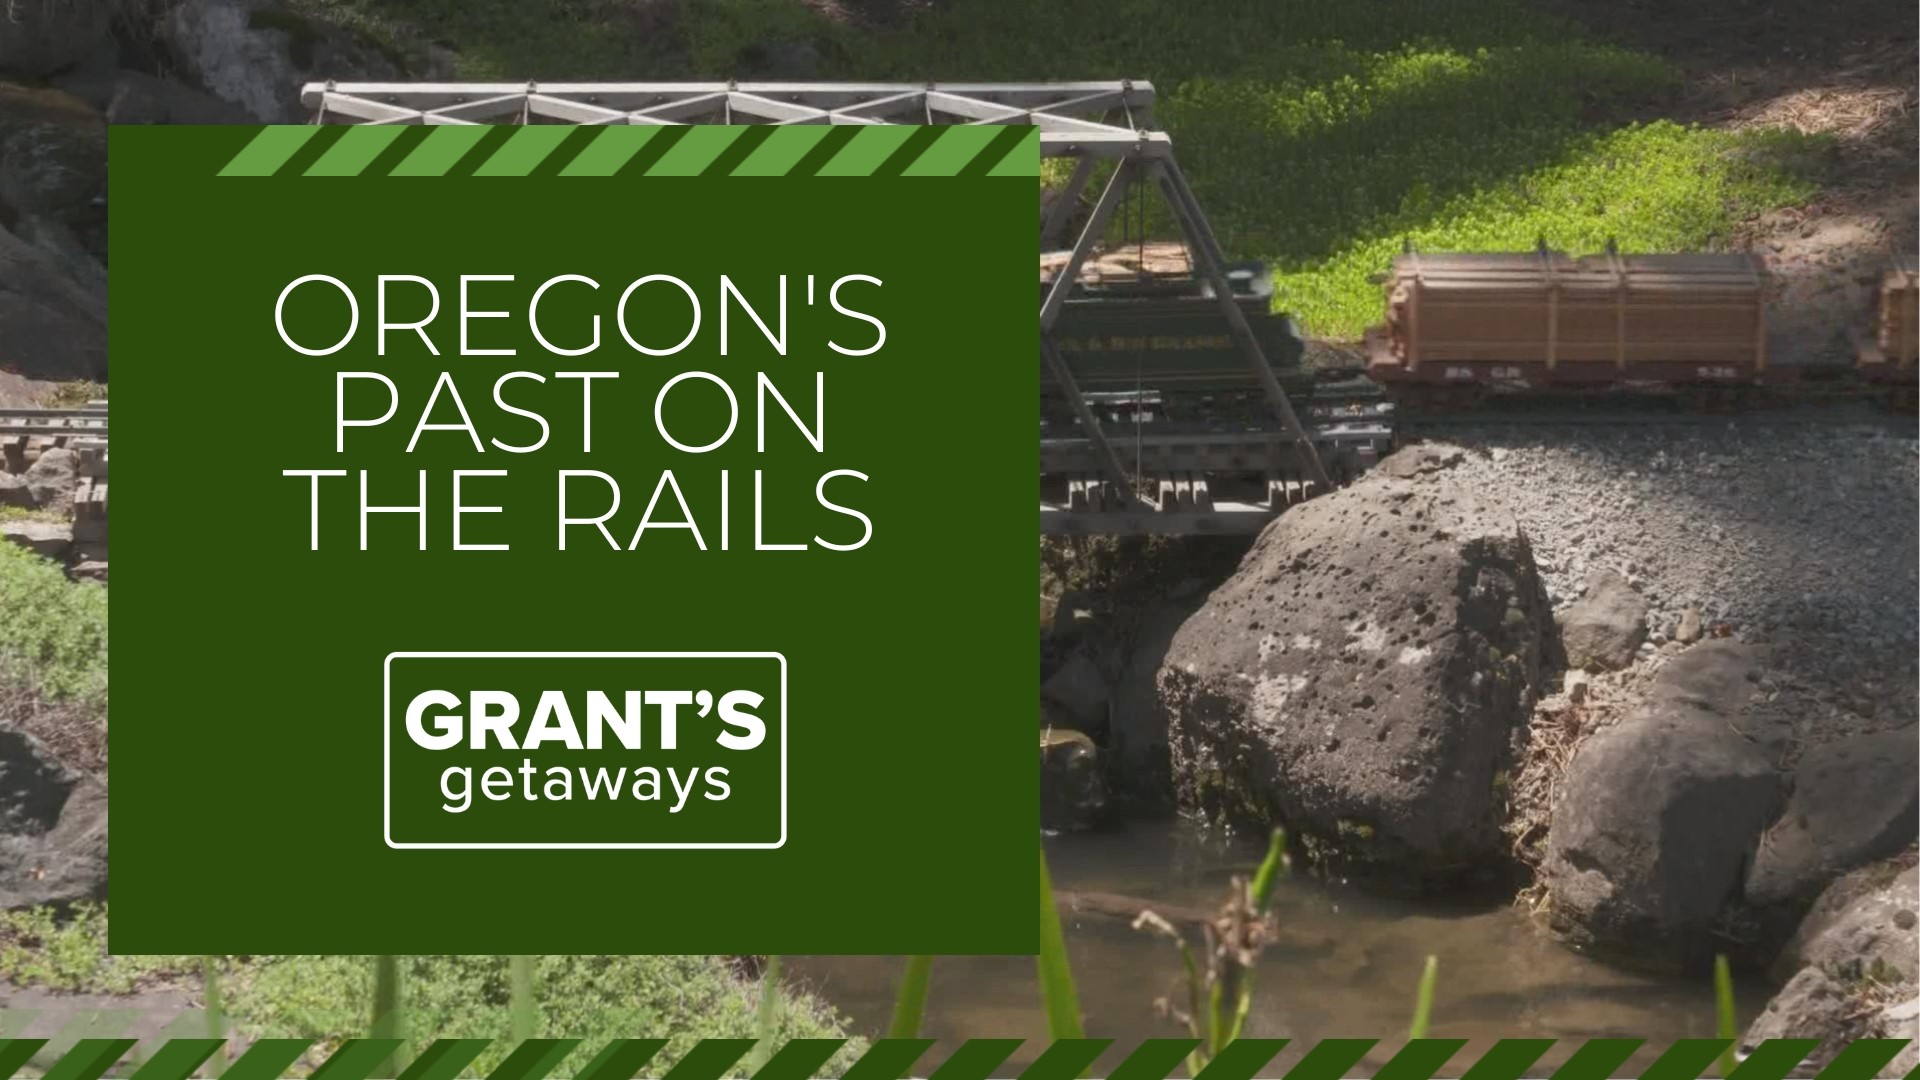 Getaways don't have to be far from home. Grant McOmie met a couple in Corbett who are railroad history buffs and bring their love of trains into their own backyard.